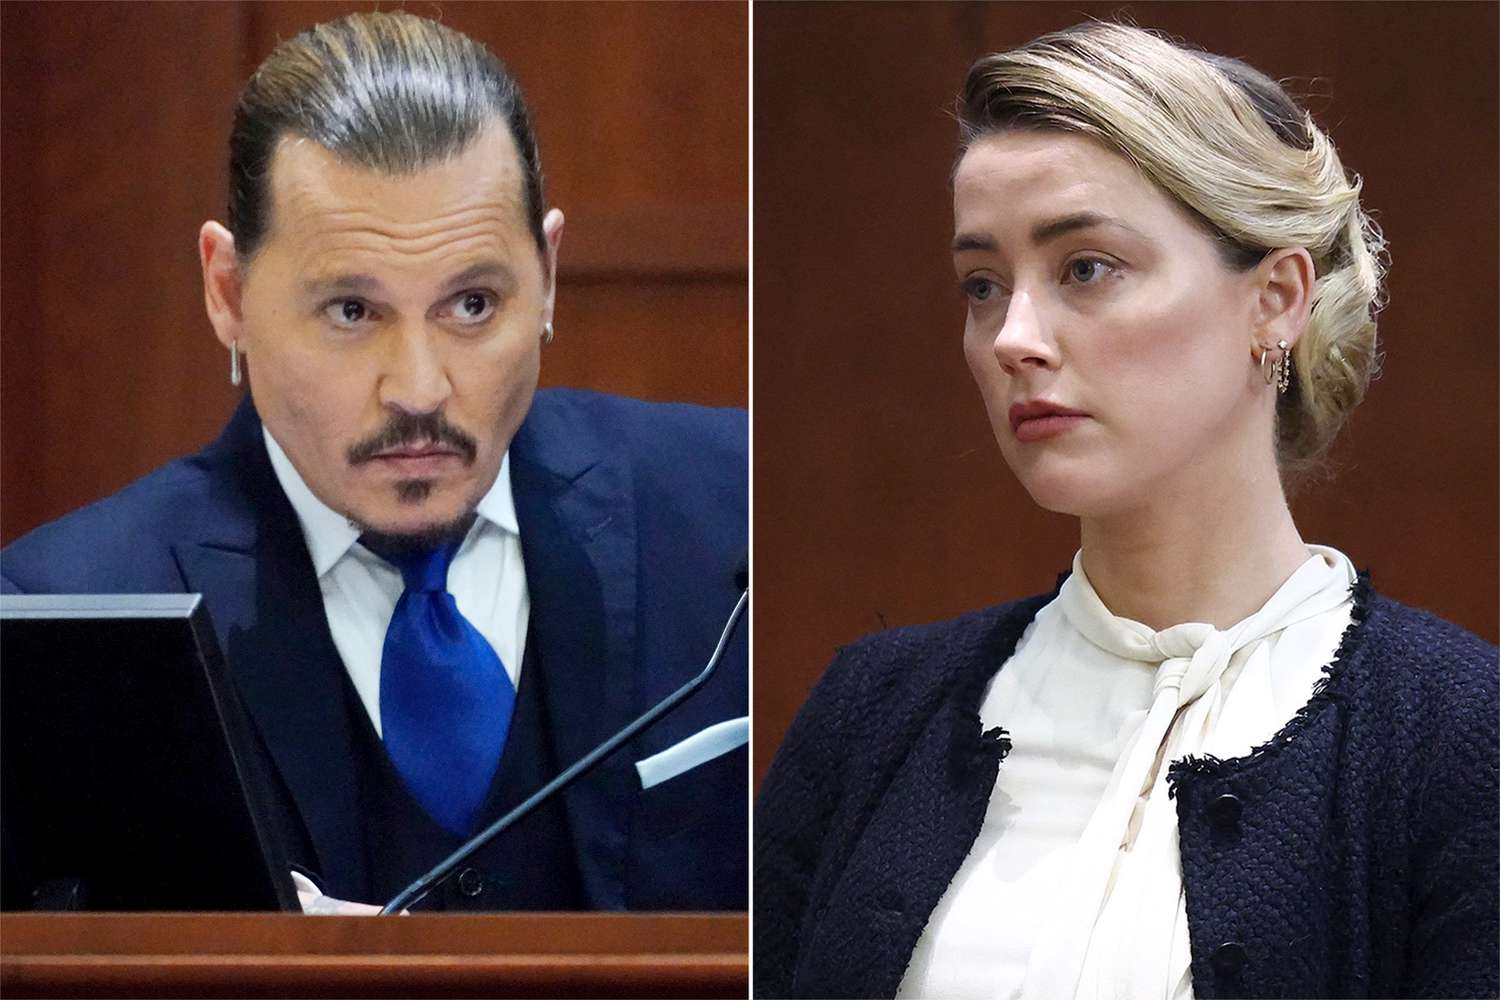 Johnny Depp and Amber Heard during their defamation trial in Fairfax, Va.